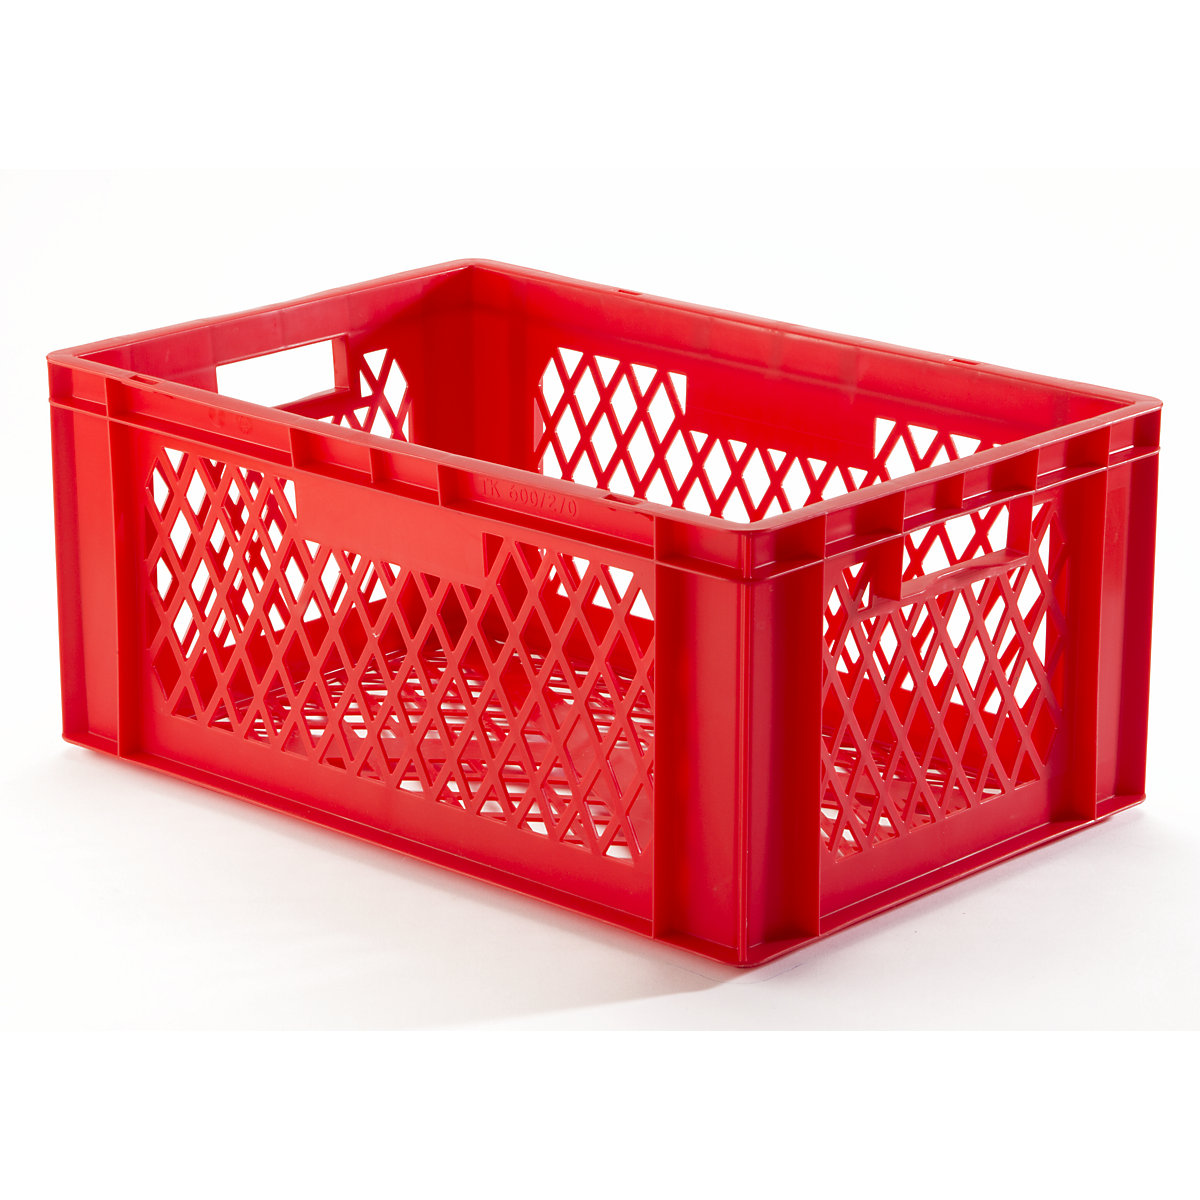 Euro stacking container, perforated walls and base, LxWxH 600 x 400 x 270 mm, red, pack of 5